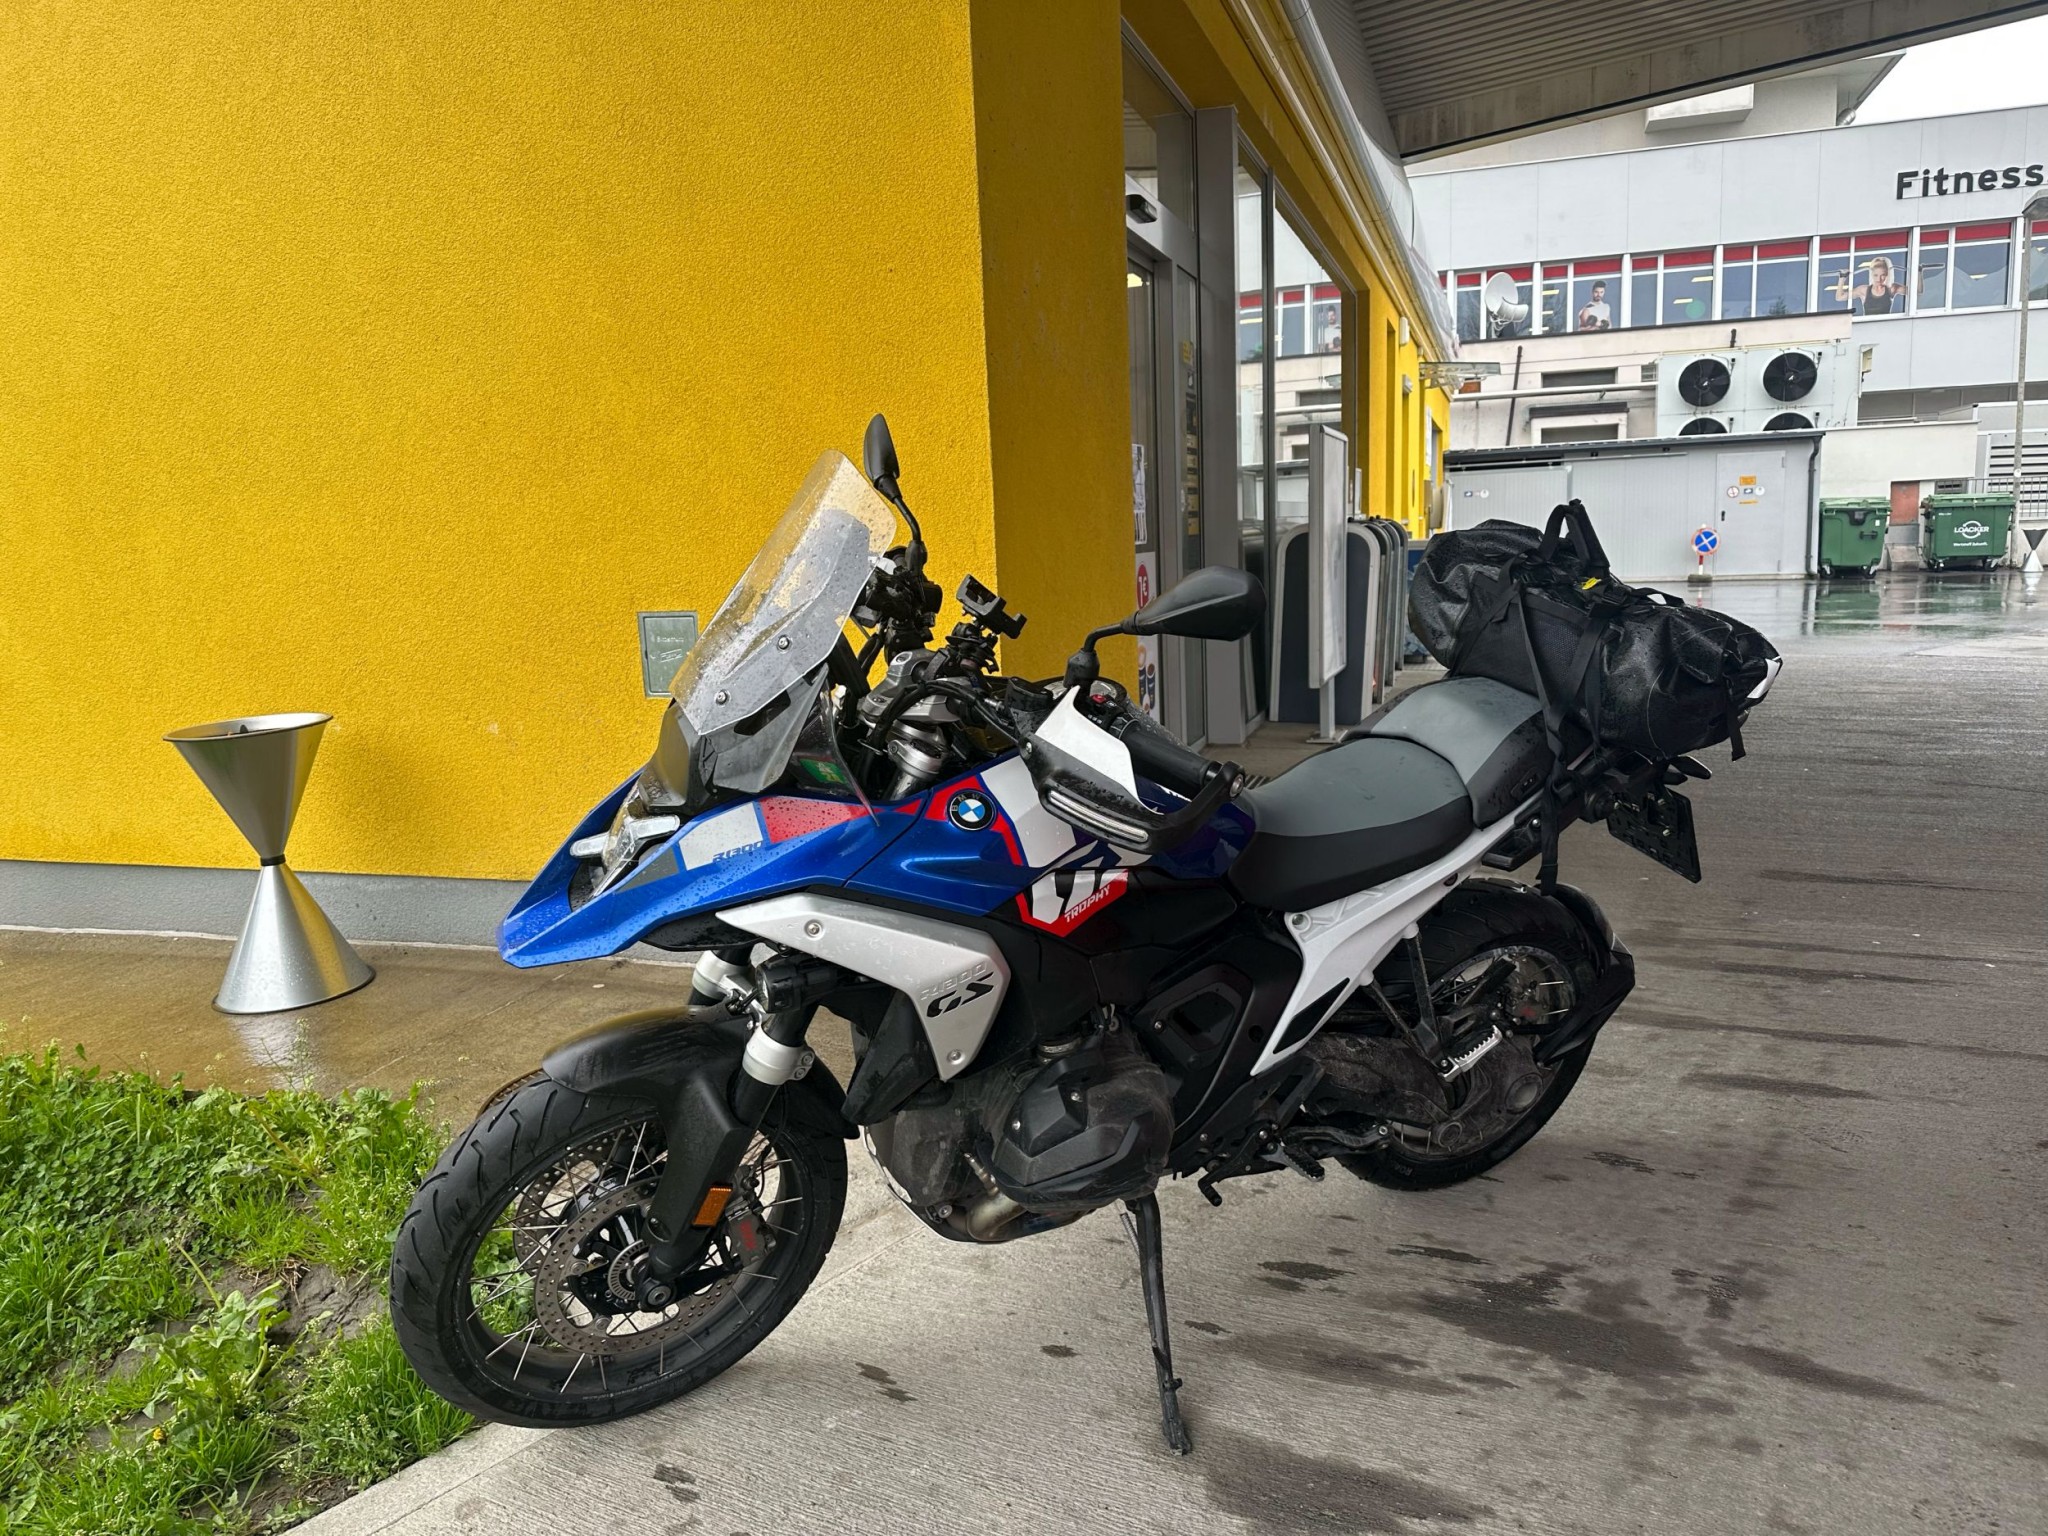 BMW R 1300 GS road test - from Barcelona to Vienna - Image 53